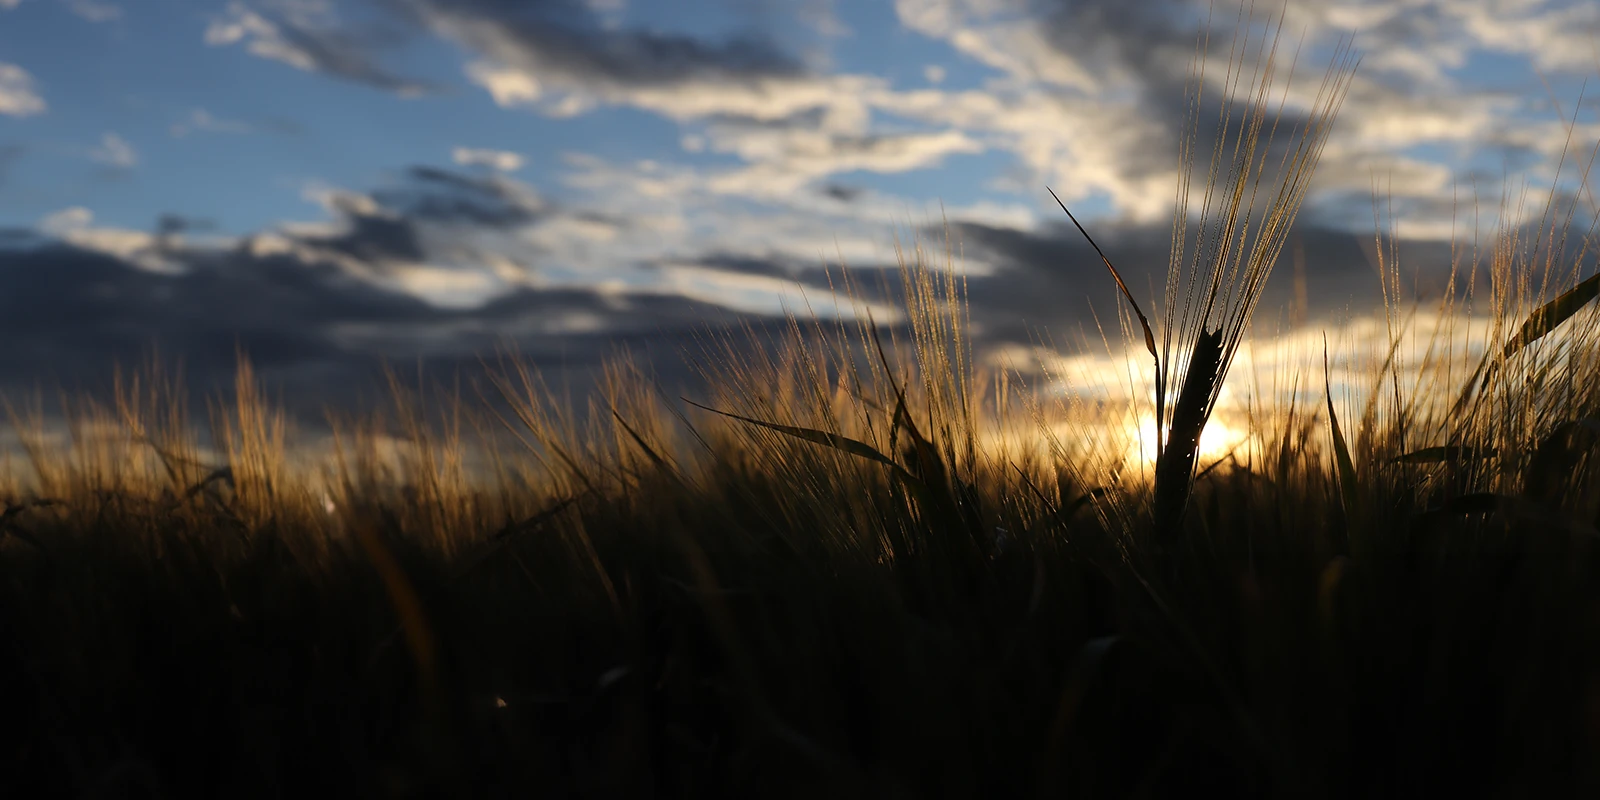 Close up view of a sunset in a barley field